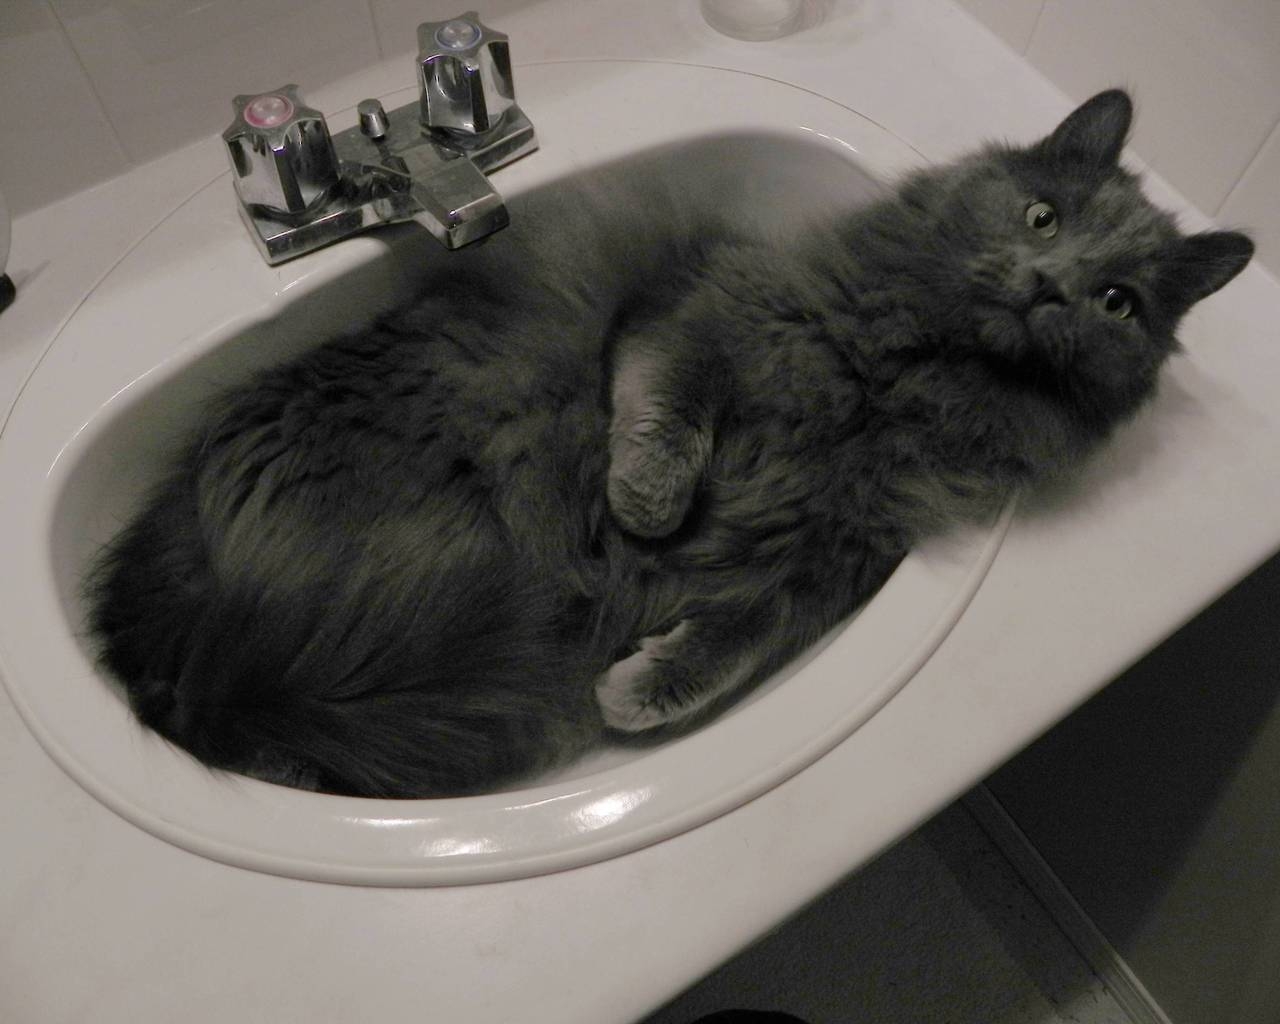 Nebelung Cat in Sink for 1280 x 1024 resolution